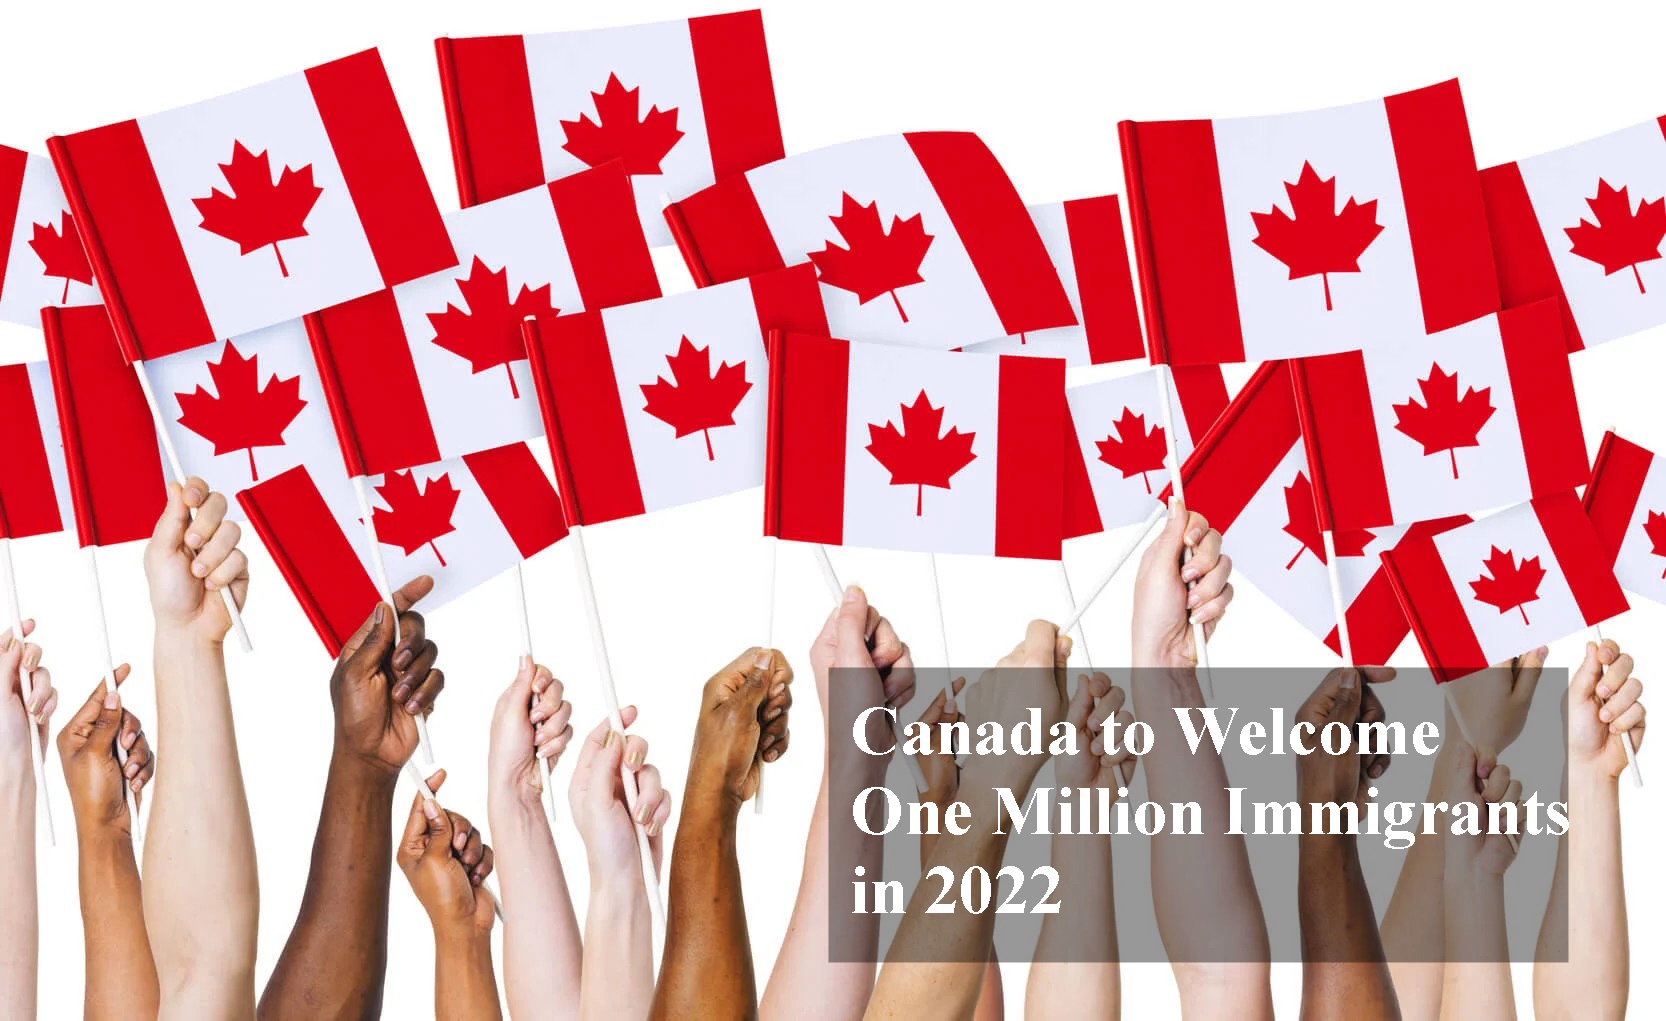 Canada to Welcome One Million Immigrants in 2022